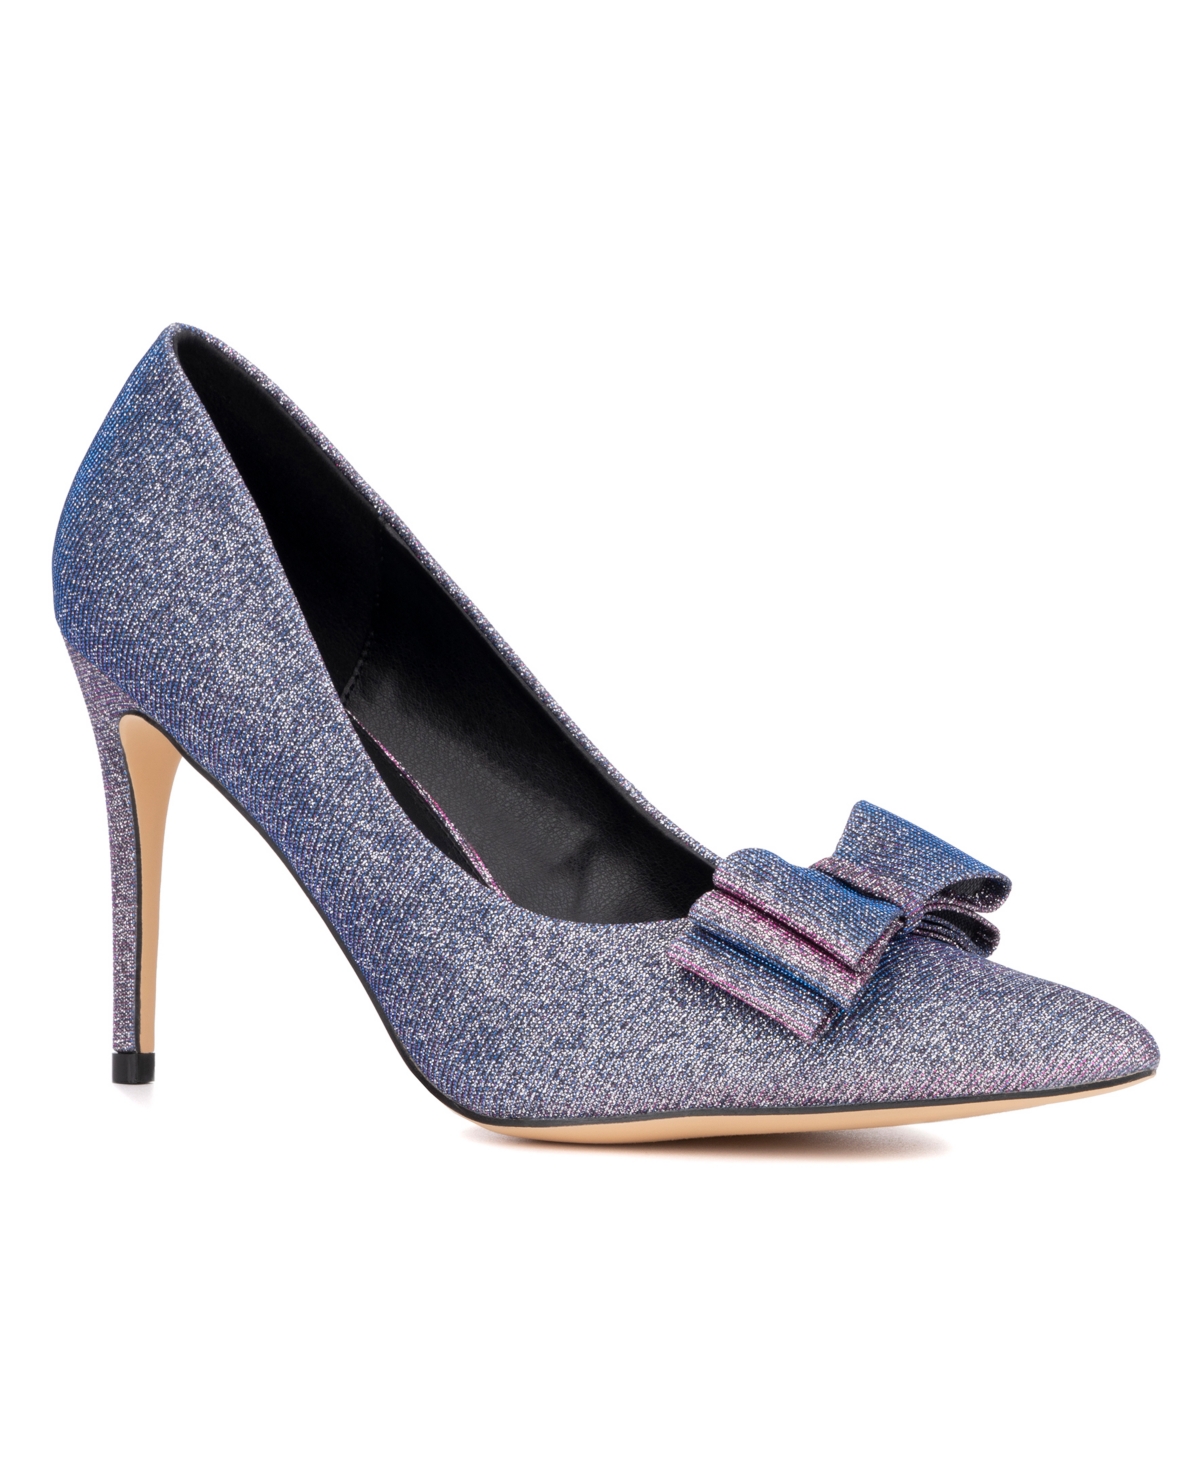 NEW YORK AND COMPANY WOMEN'S LIV PUMPS WOMEN'S SHOES